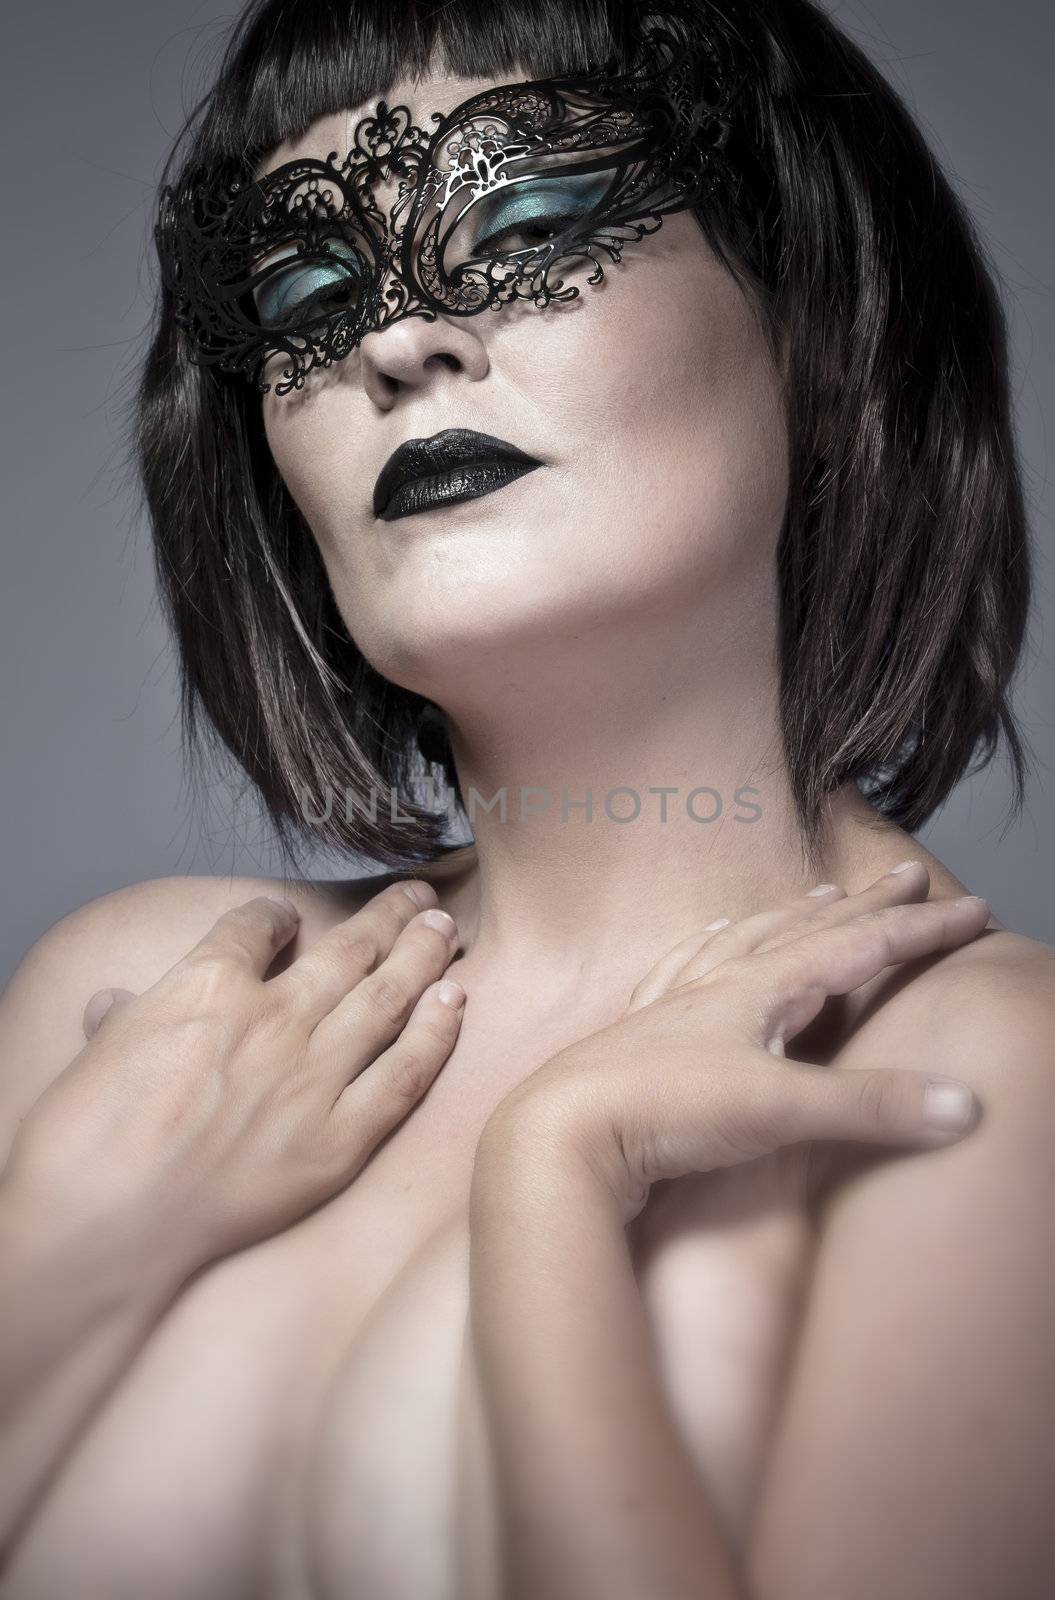 Nude woman with Venetian mask and corset, sensual, sexy and attr by FernandoCortes